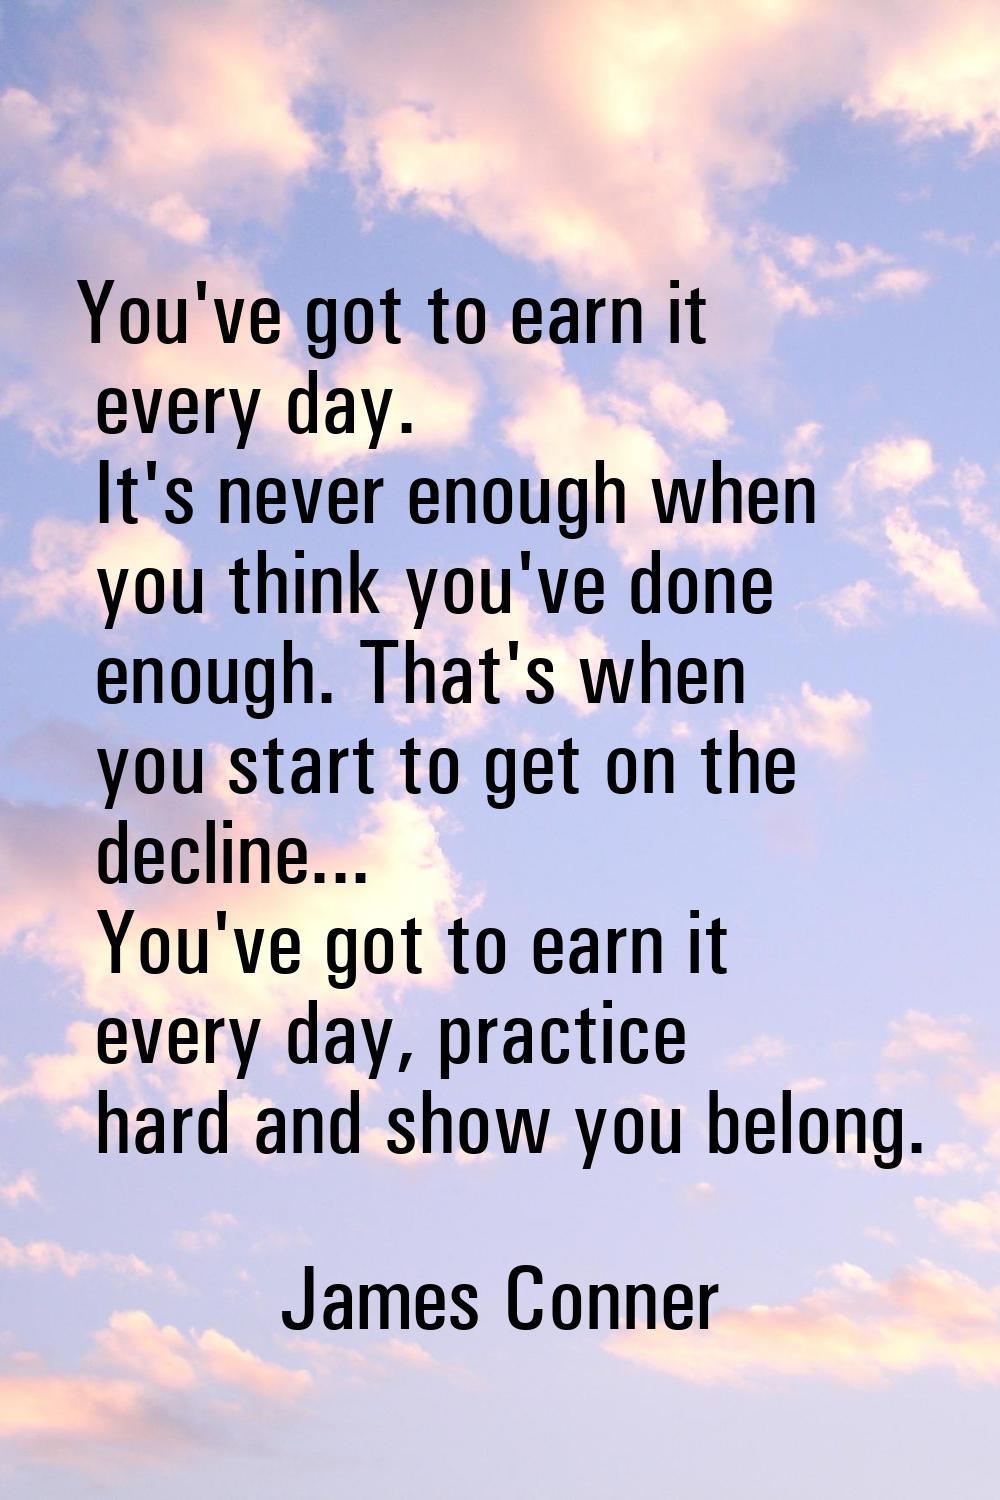 You've got to earn it every day. It's never enough when you think you've done enough. That's when y